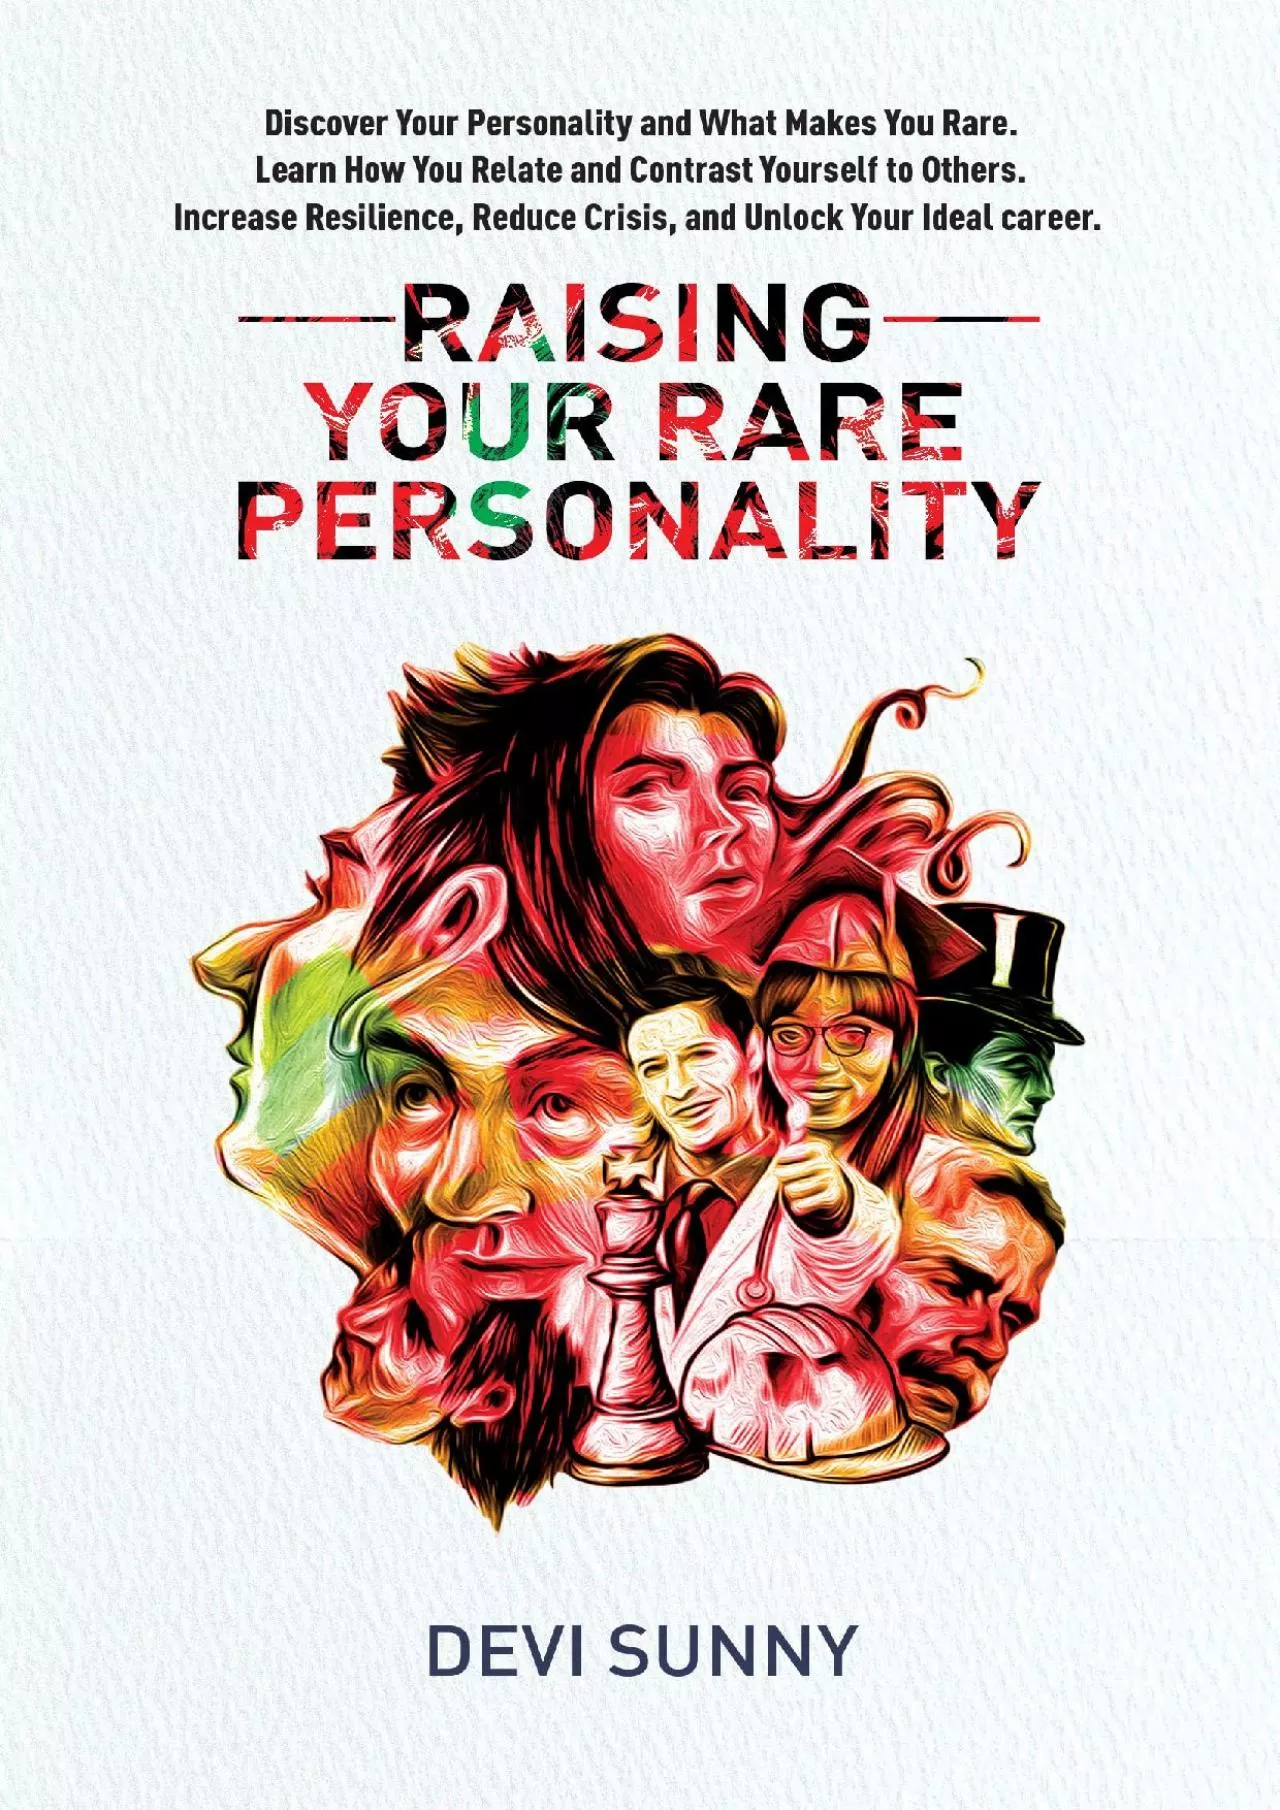 [EBOOK] Raising Your Rare Personality : Discover Your Personality  What Makes You Rare.